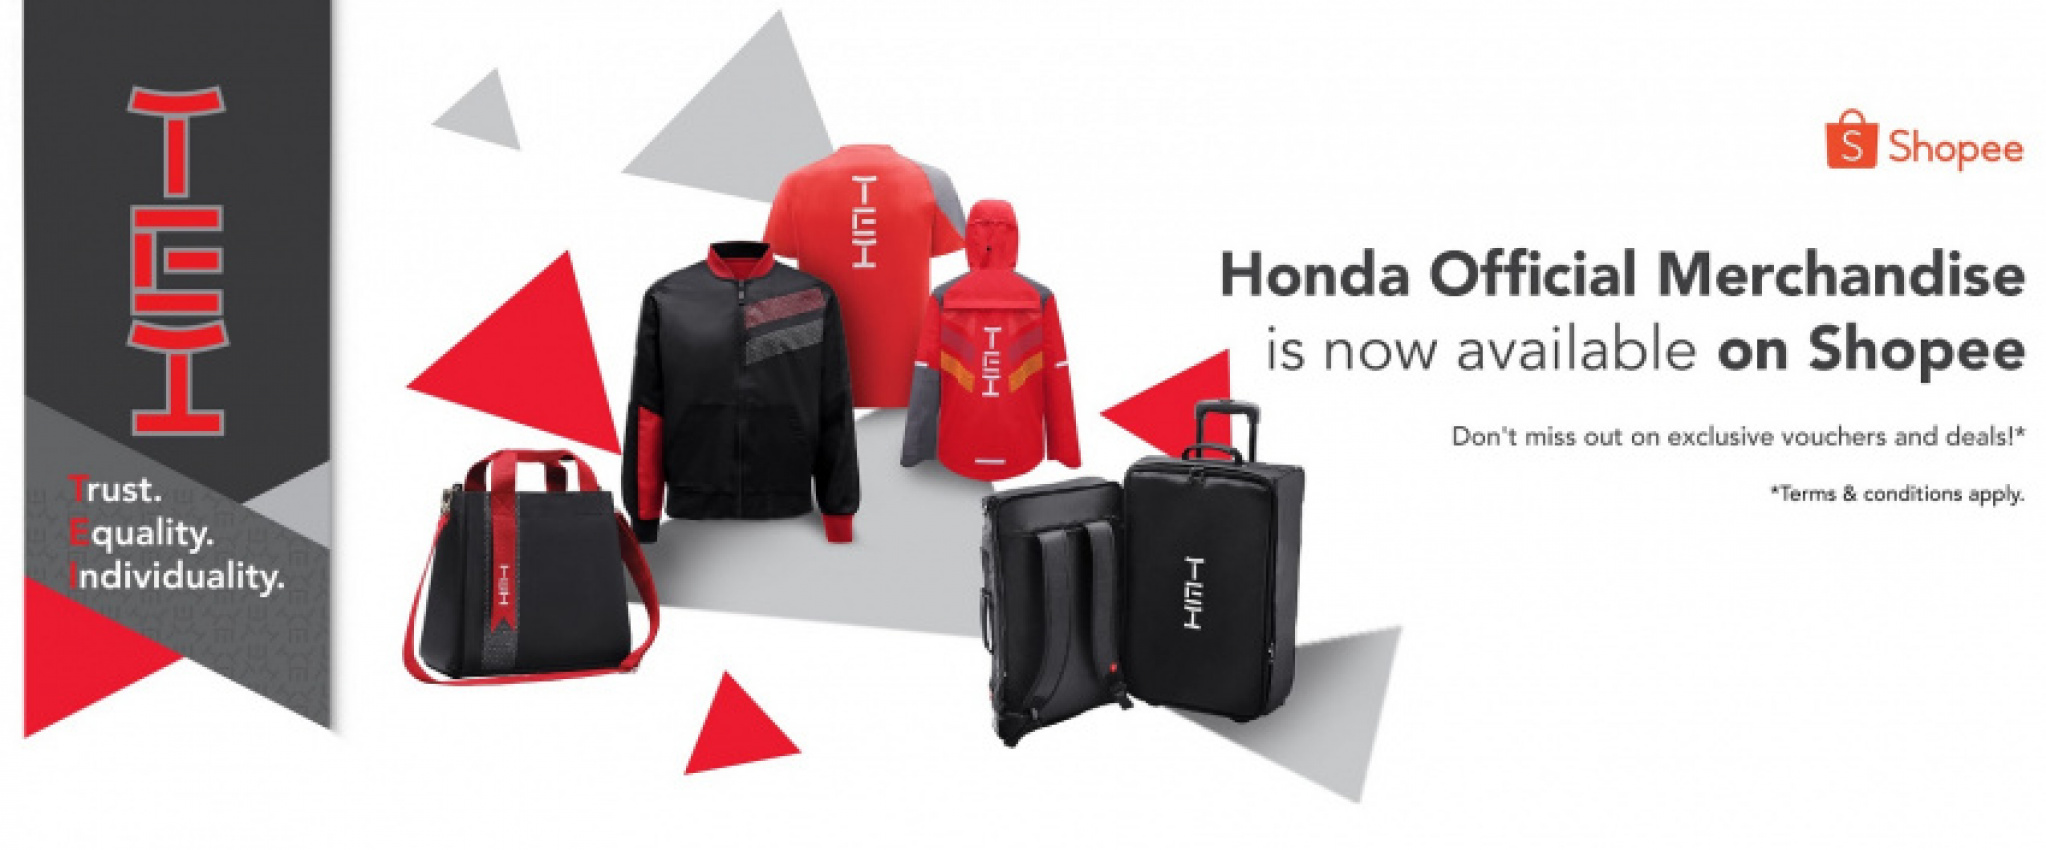 autos, car brands, cars, honda, automotive, e-commerce, honda malaysia, malaysia, official merchandise, online shopping, shopee, honda malaysia official merchandise now available in shopee